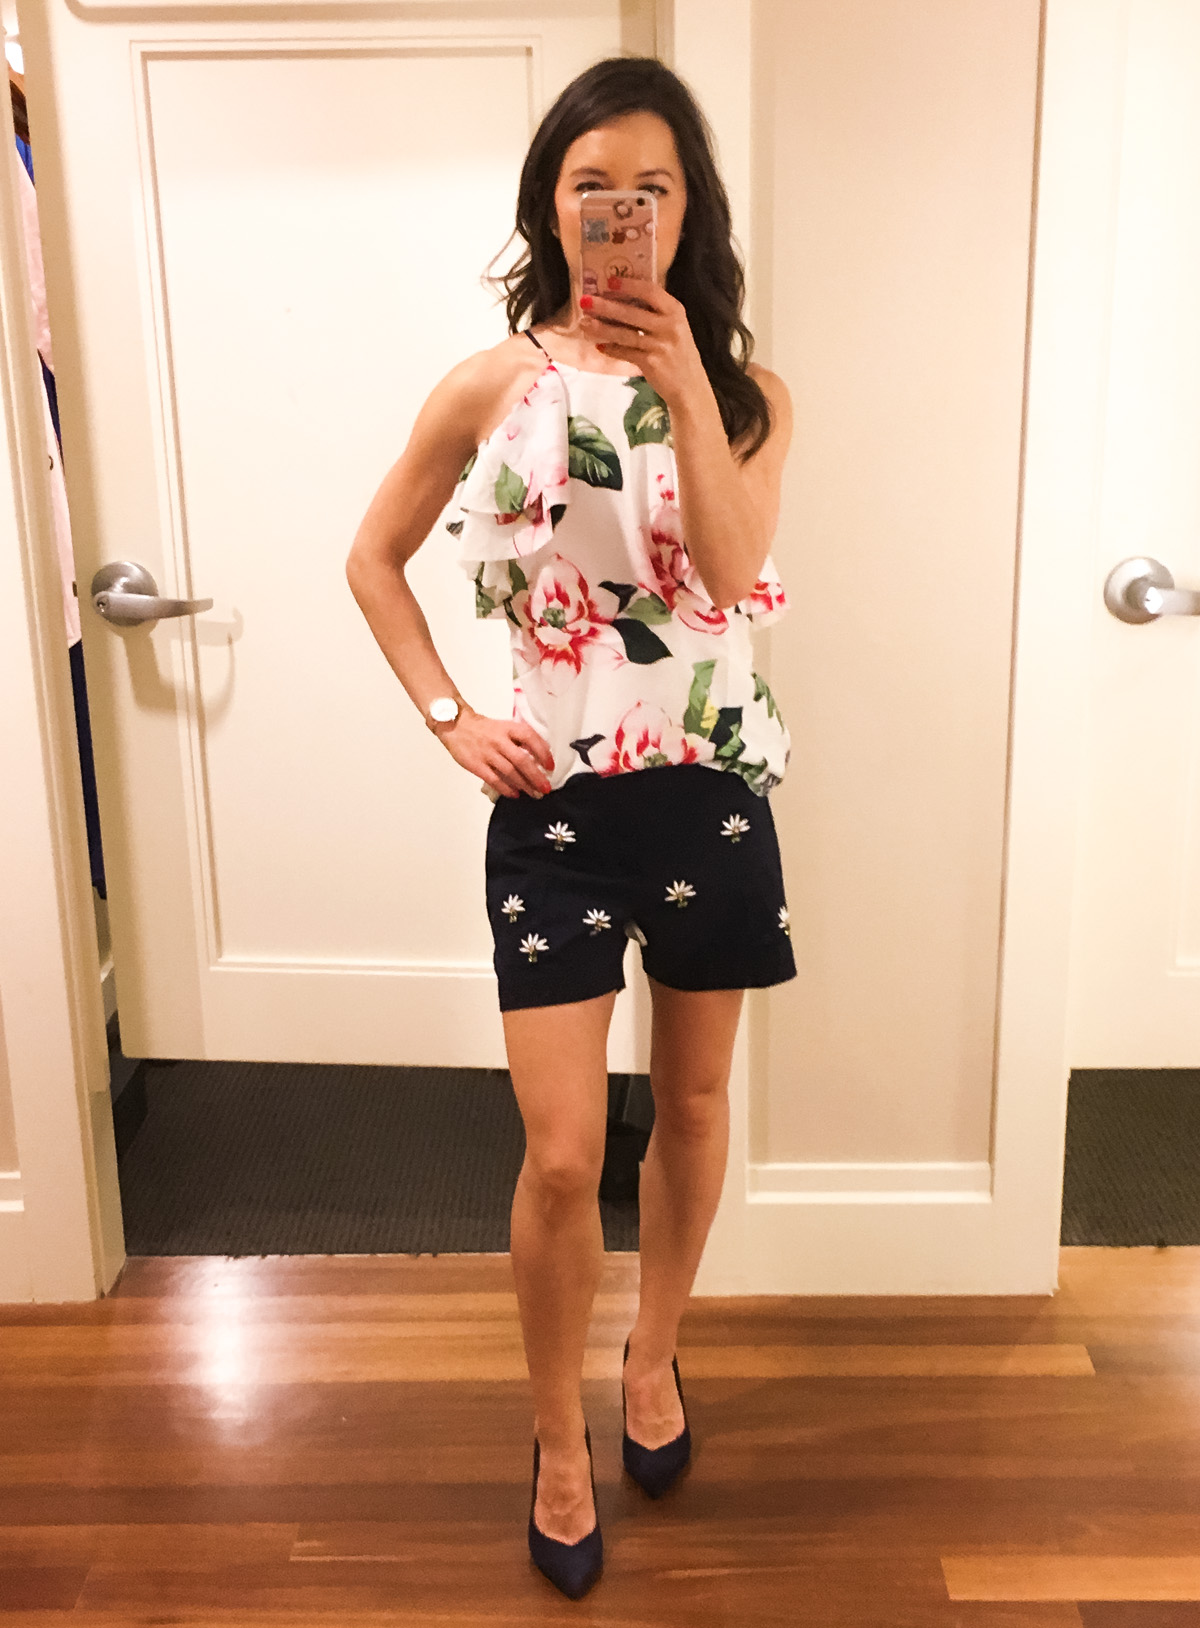 Best Banana Republic summer collection 2017 outfit inspiration | Petite fashion & style | Floral print | embellishment shorts | One shoulder ruffle dress | Tanner Market Pasadena CA | Ryan shorts